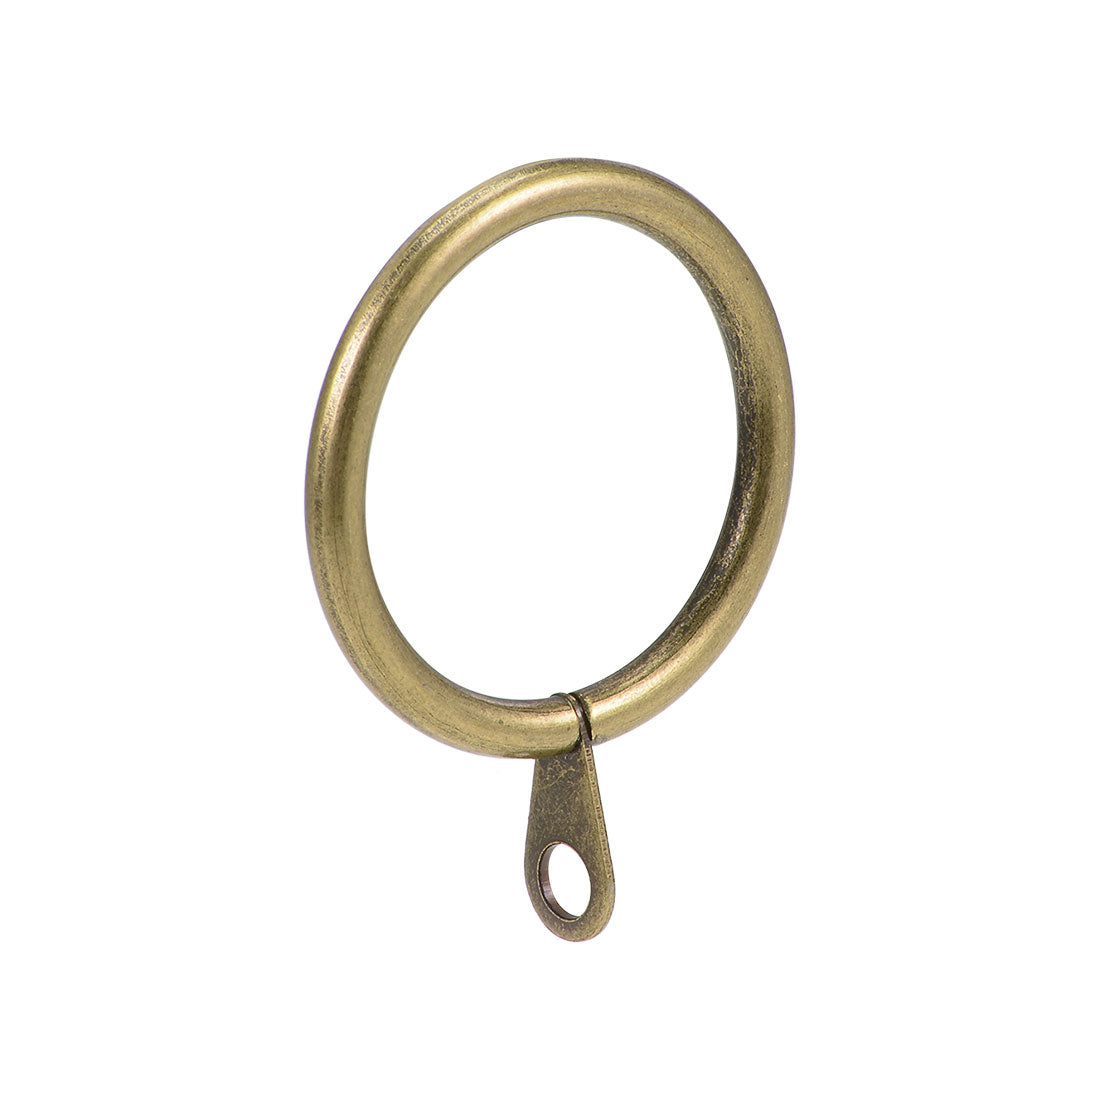 uxcell Uxcell Curtain Ring Metal 32mm Inner Dia Drapery Ring for Curtain Rods Bronze 28 Pcs